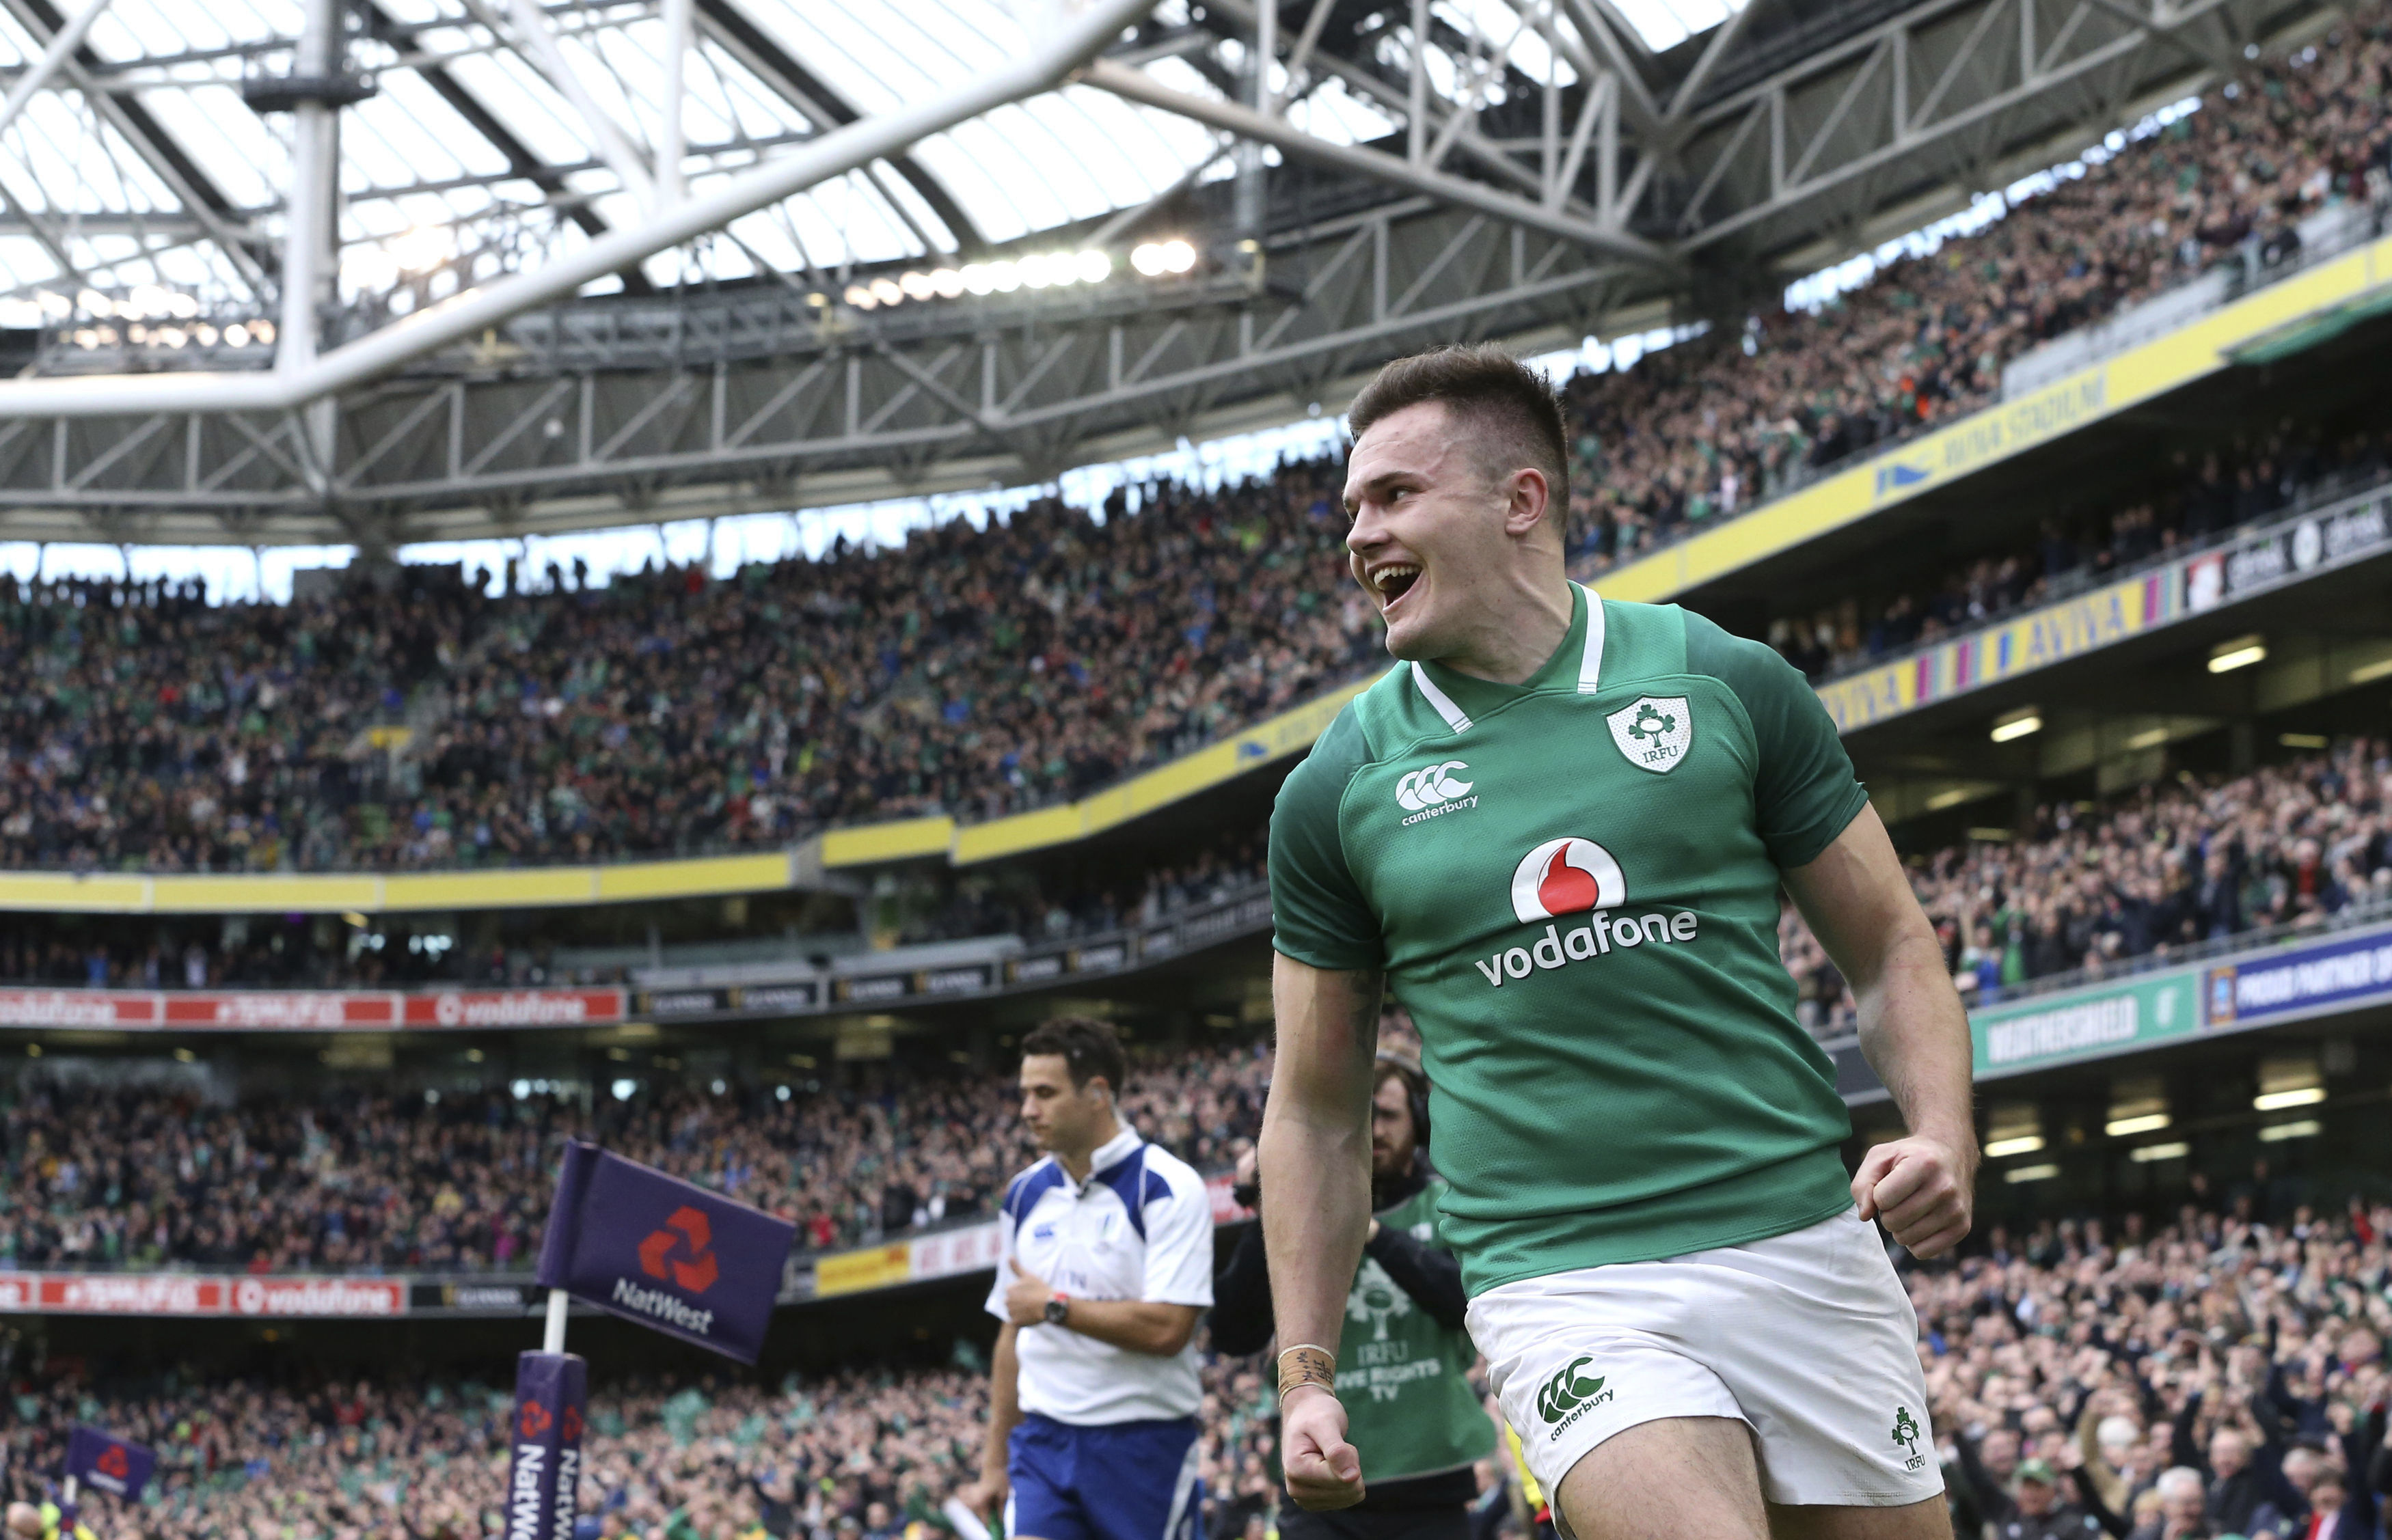 Rugby Ireland move past England into second behind All Blacks on world rankings